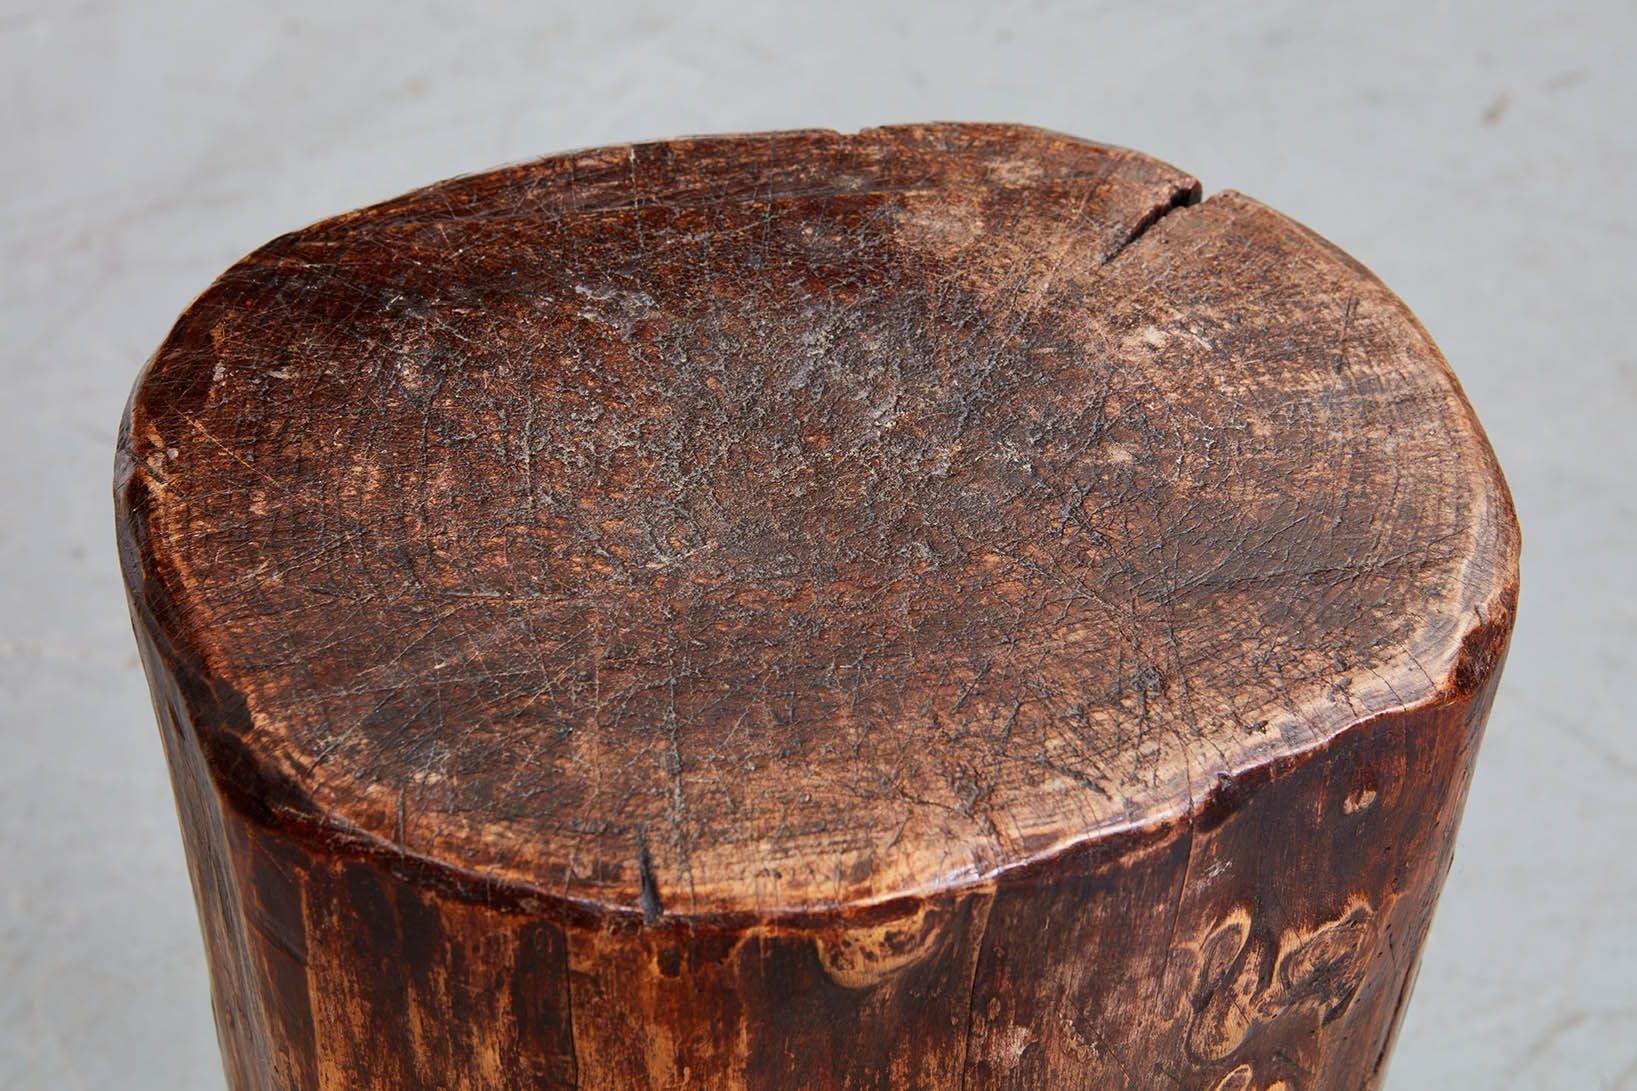 A vernacular cheese display table, also known as a dairy table, England, circa 1840, in oak on three hand-hewn legs. These tables were found in dairy shops to display rounds of cheese on their tops. Now a useful and interesting drinks table. Still